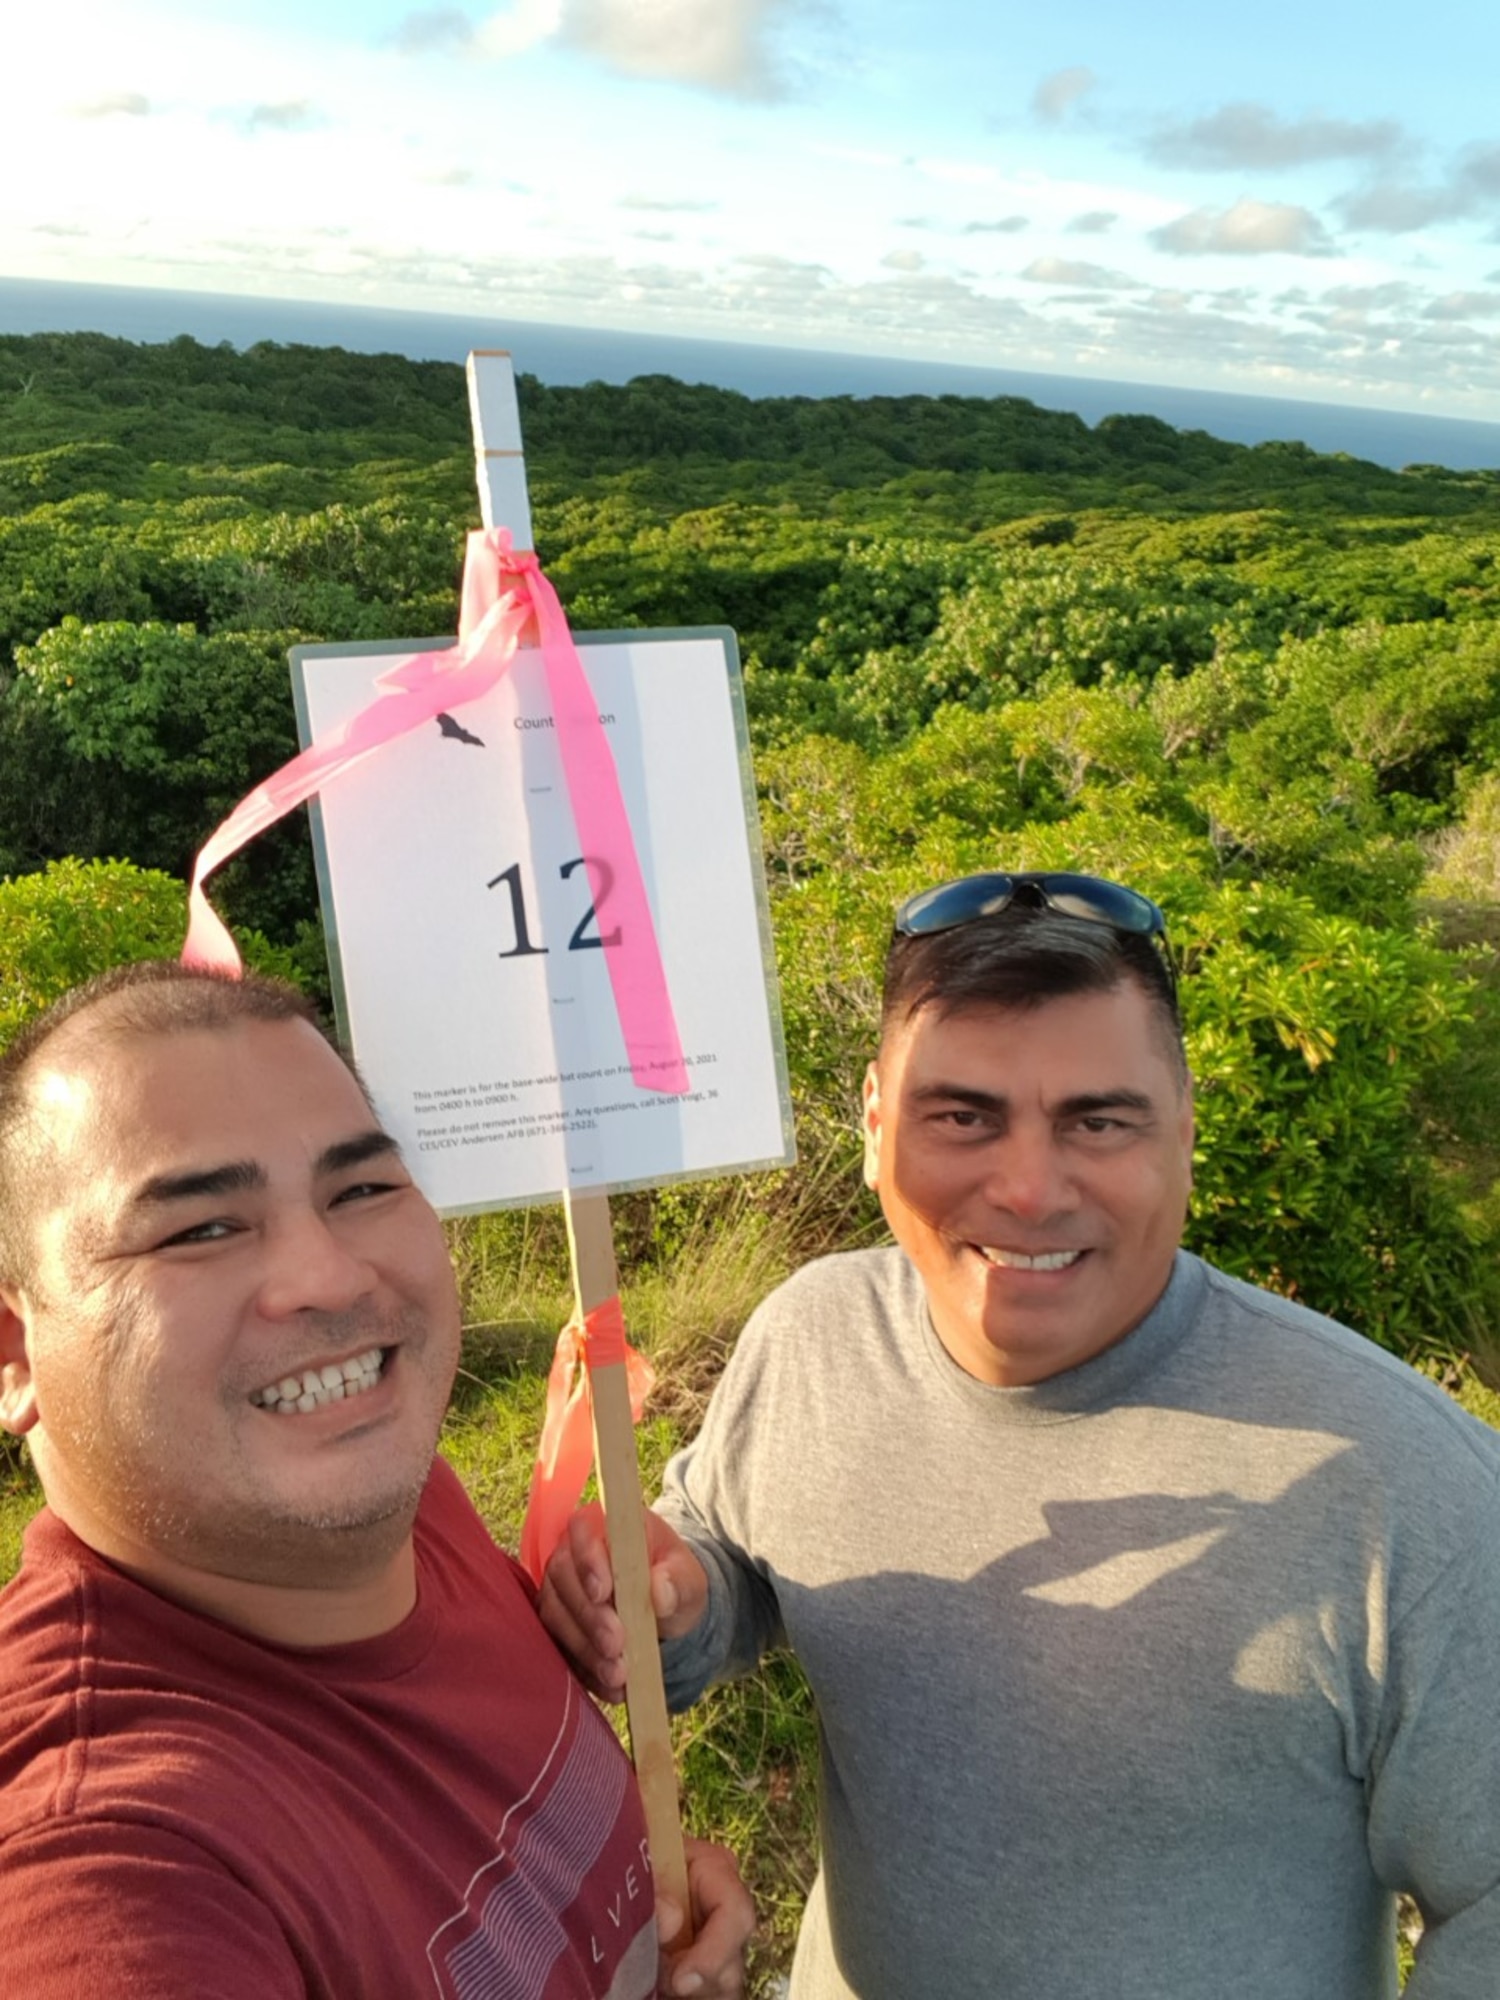 James Lewis and Jacob SanNicolas, 2021 Annual Fruit Bat Survey volunteers, take a photo at their station during the survey at Andersen Air Force Base, Guam, Aug. 20, 2021. Among agencies, community members and volunteers from 21 different organizations on base, 89 participants were able to participate in the survey and add to historical data that has been collected to help the endangered fanihi, a fruit bat that is endemic to the Mariana Islands. Observers were teamed among offices as part of COVID-19 mitigation measures.  (Courtesy photo)